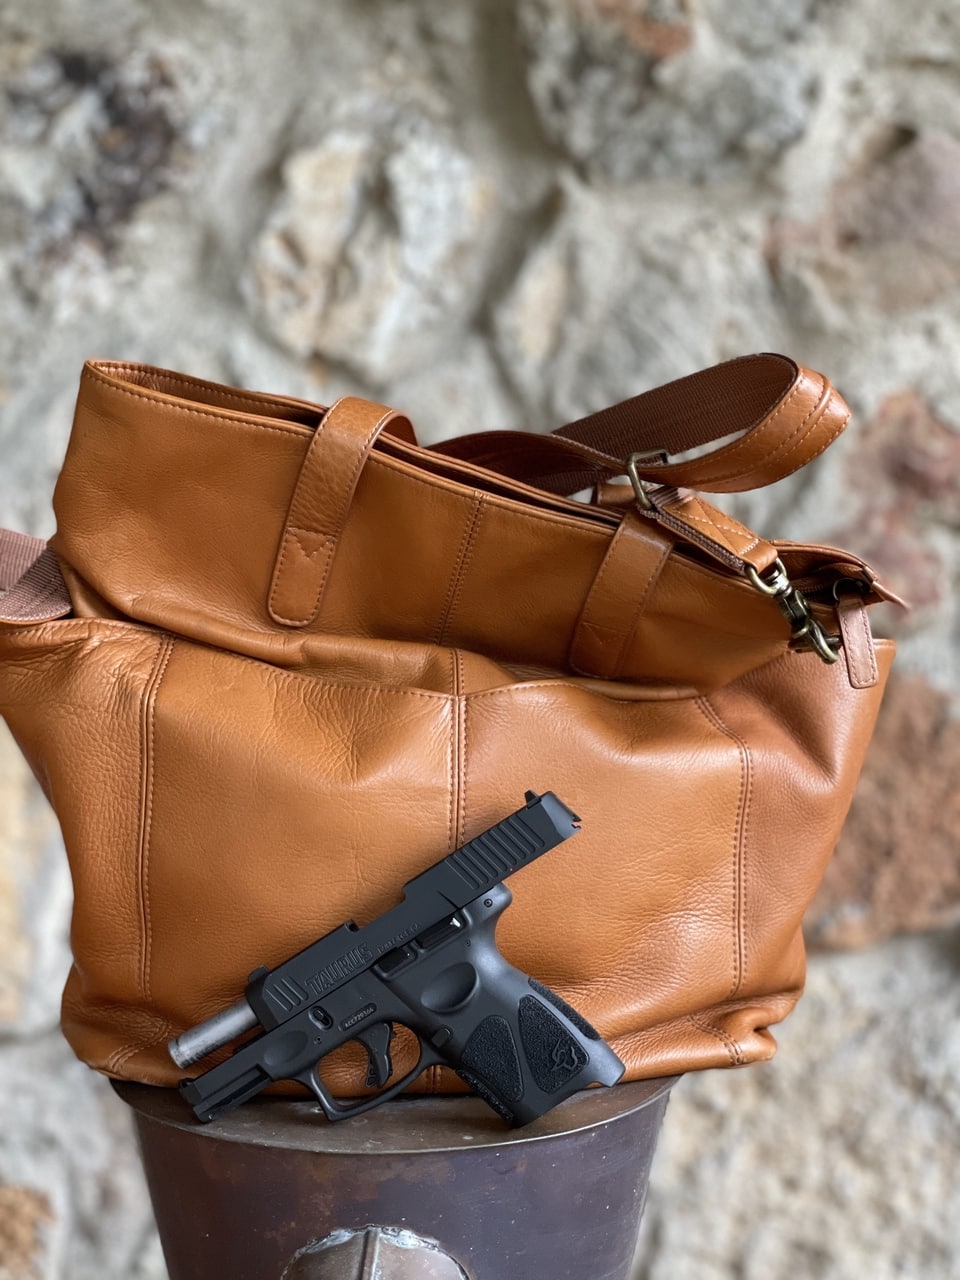 GTM-107 tote and Taurus G3c